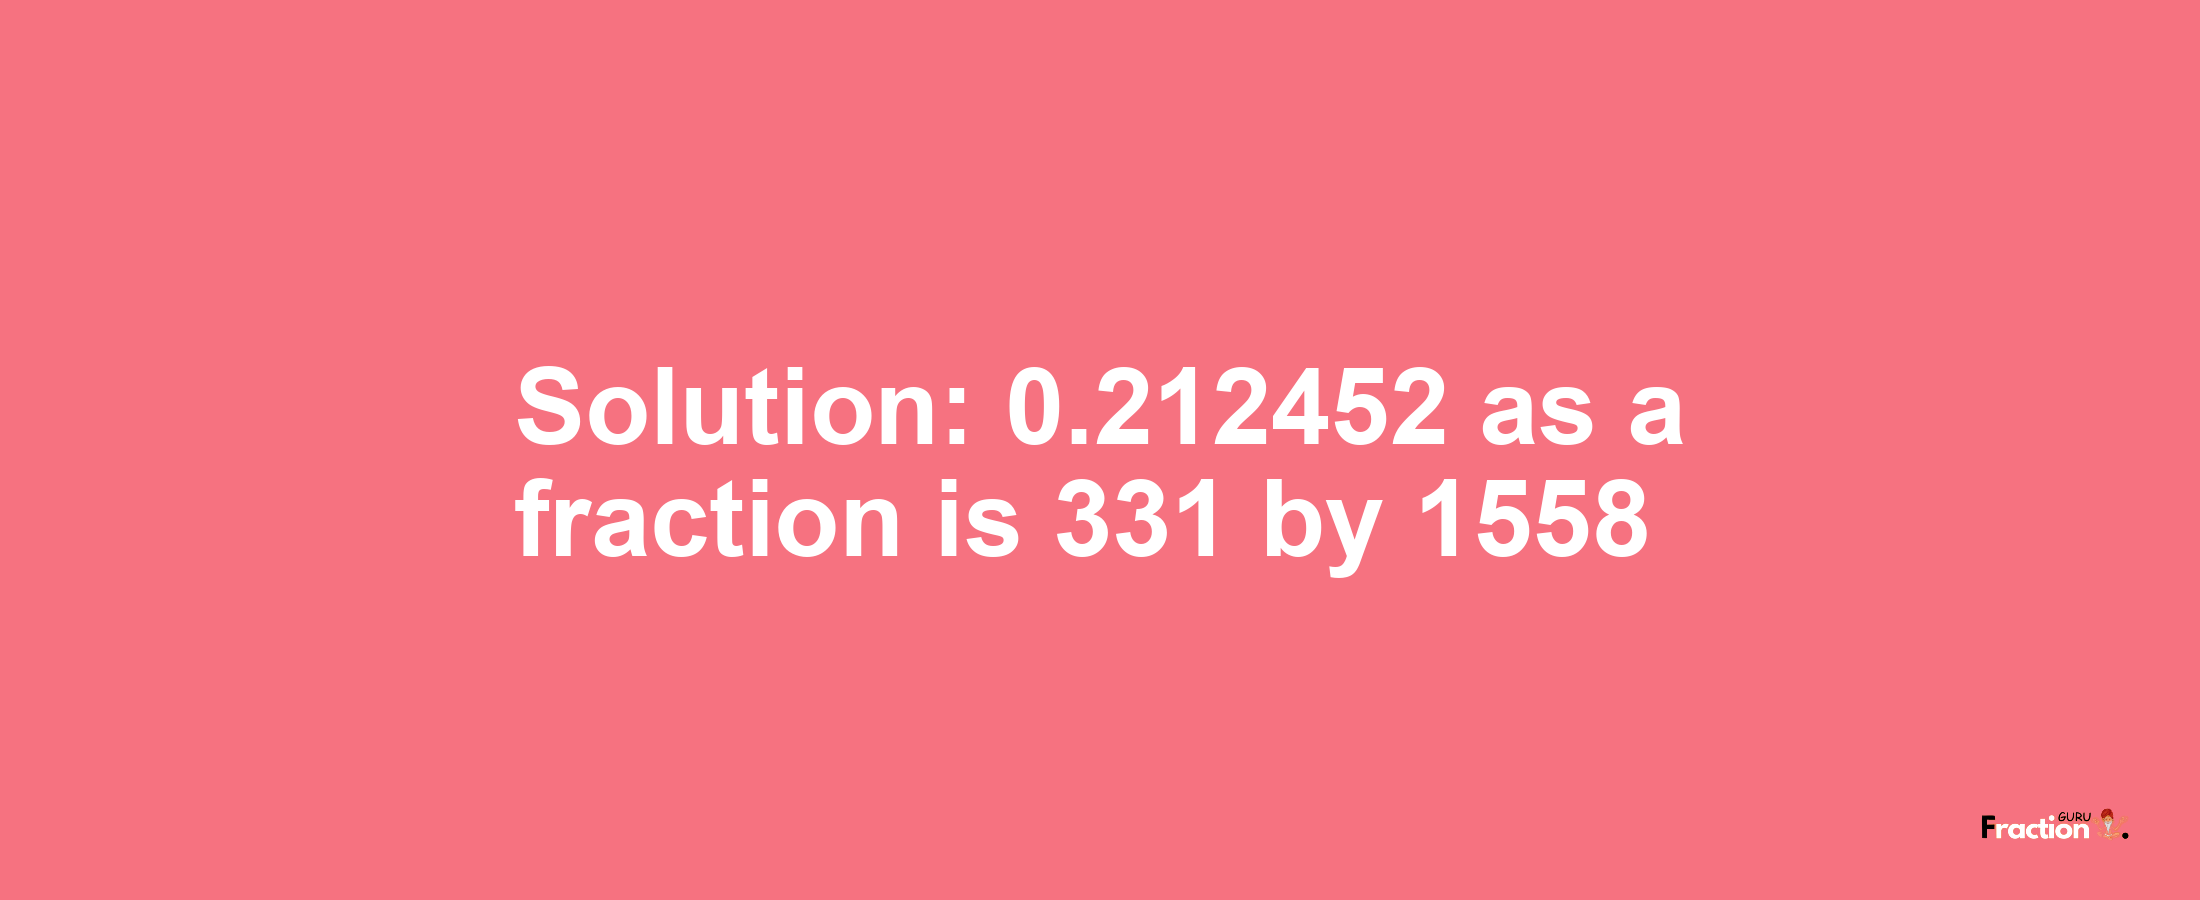 Solution:0.212452 as a fraction is 331/1558